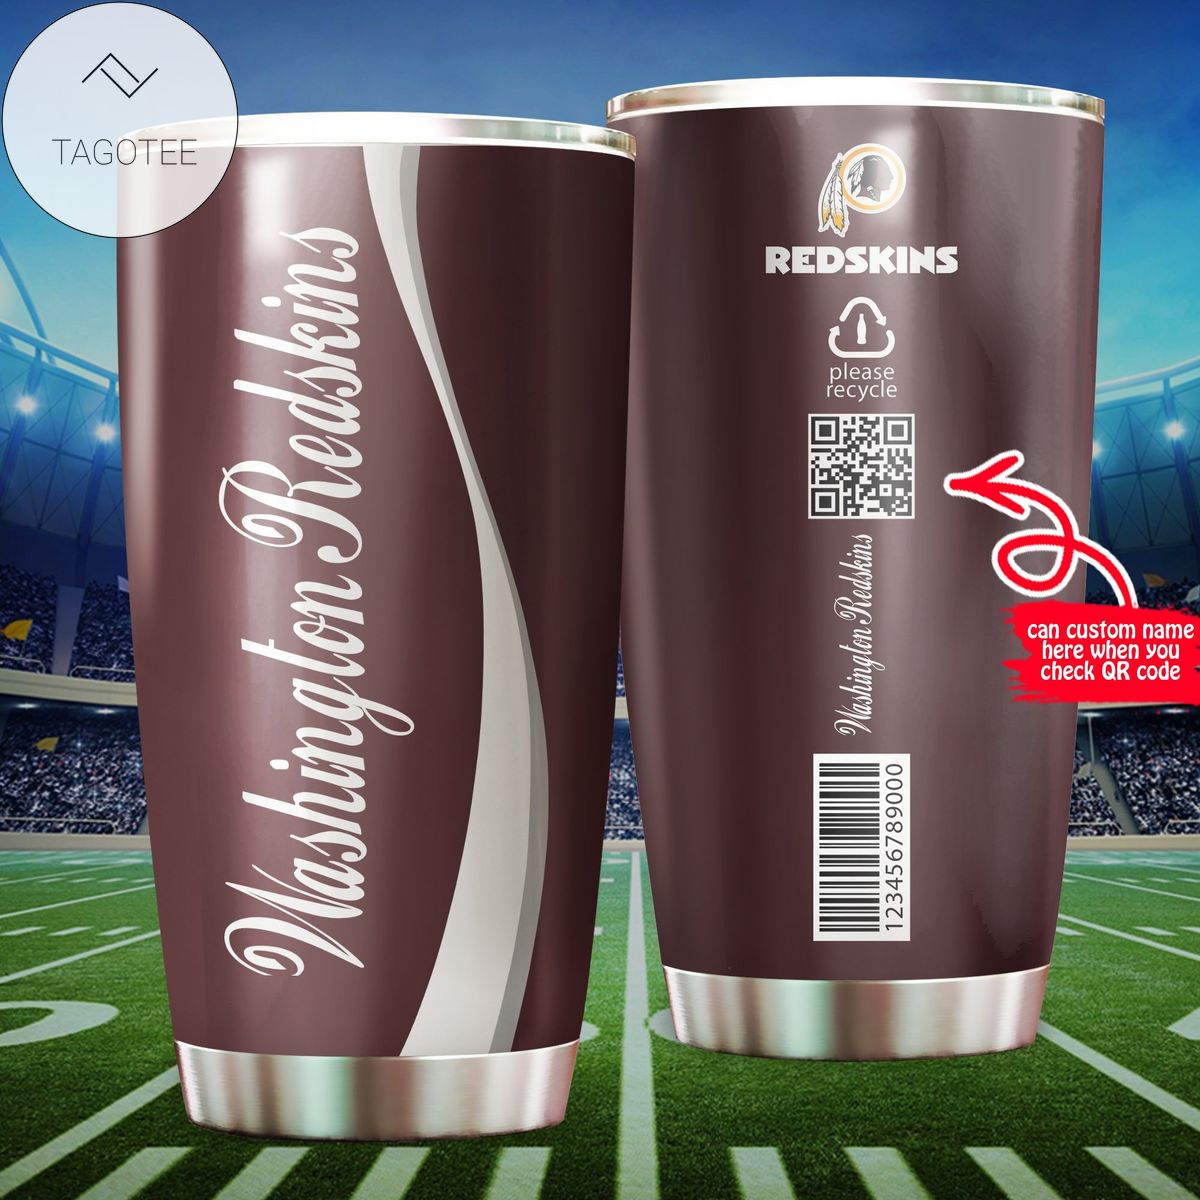 Washington Redskins Coca Cola Design Custom Name QR Code Stainless Steel Tumblers Cup 20 oz Drinkware Personalized Gifts For NFL Fans